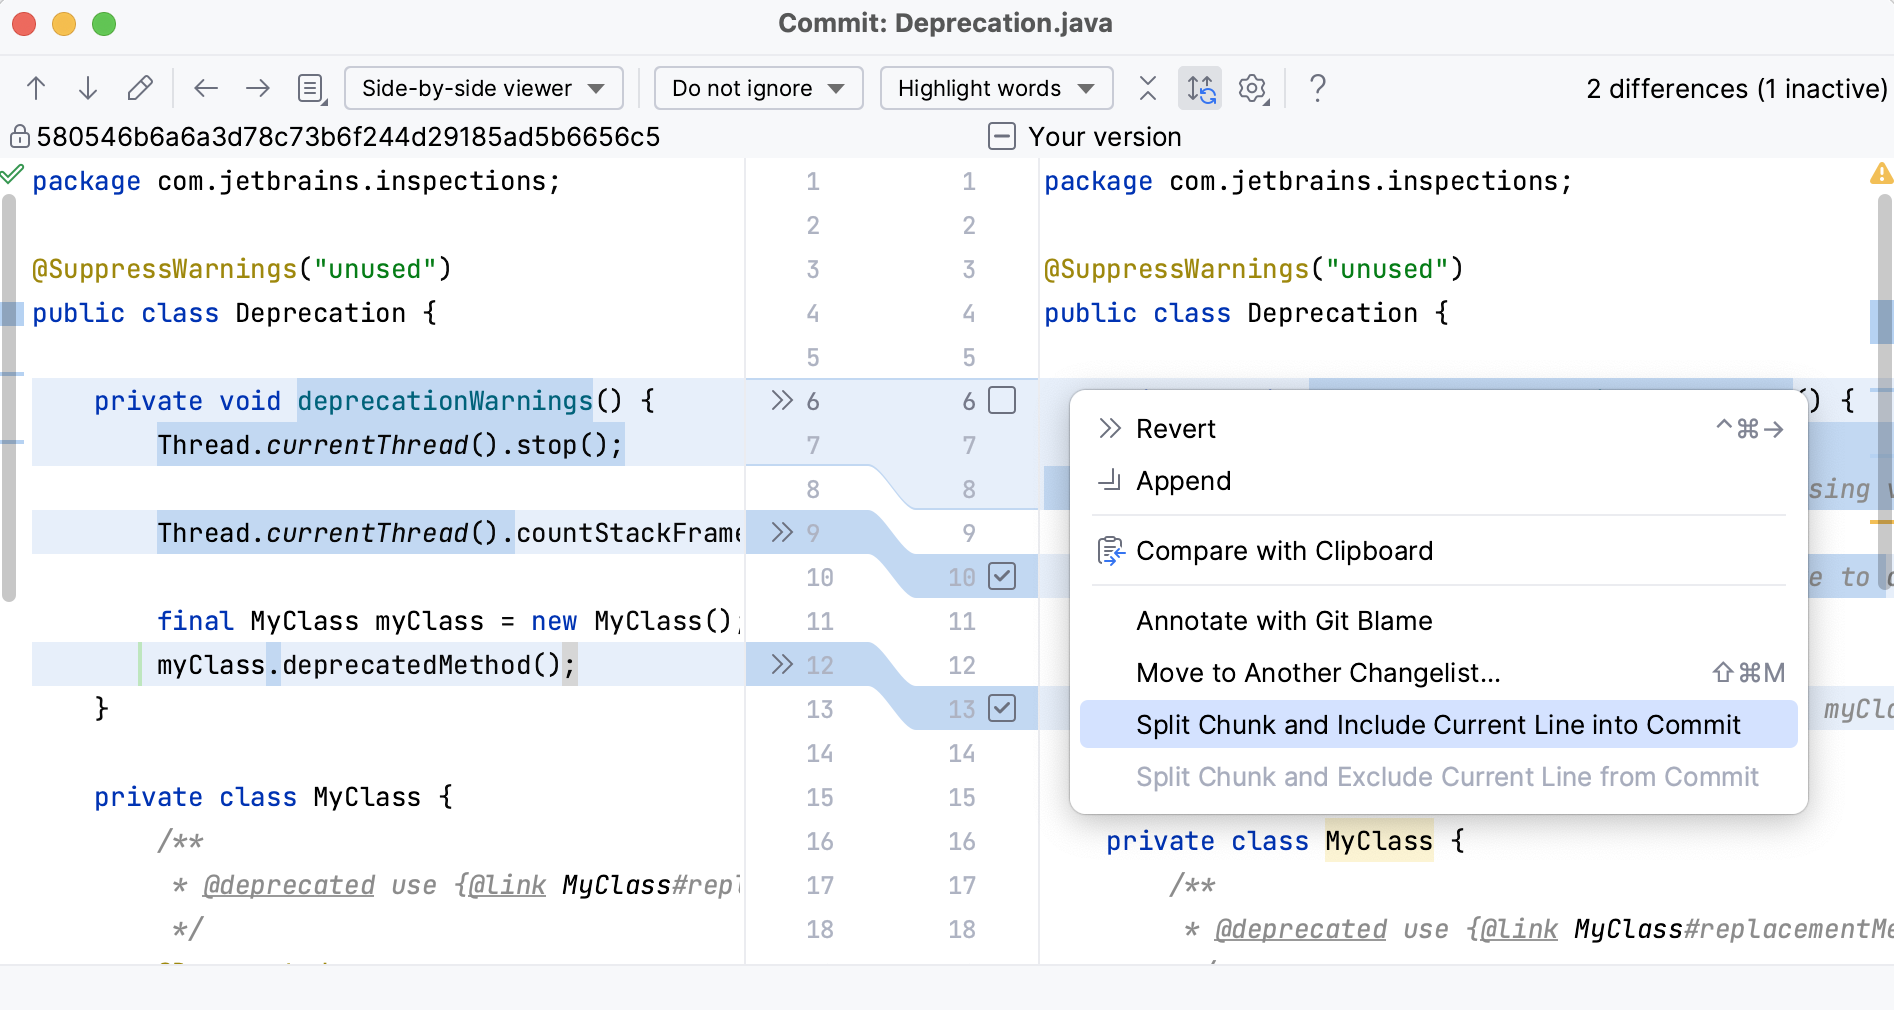 IntelliJ IDEA: An option to include current line in commit in the context menu